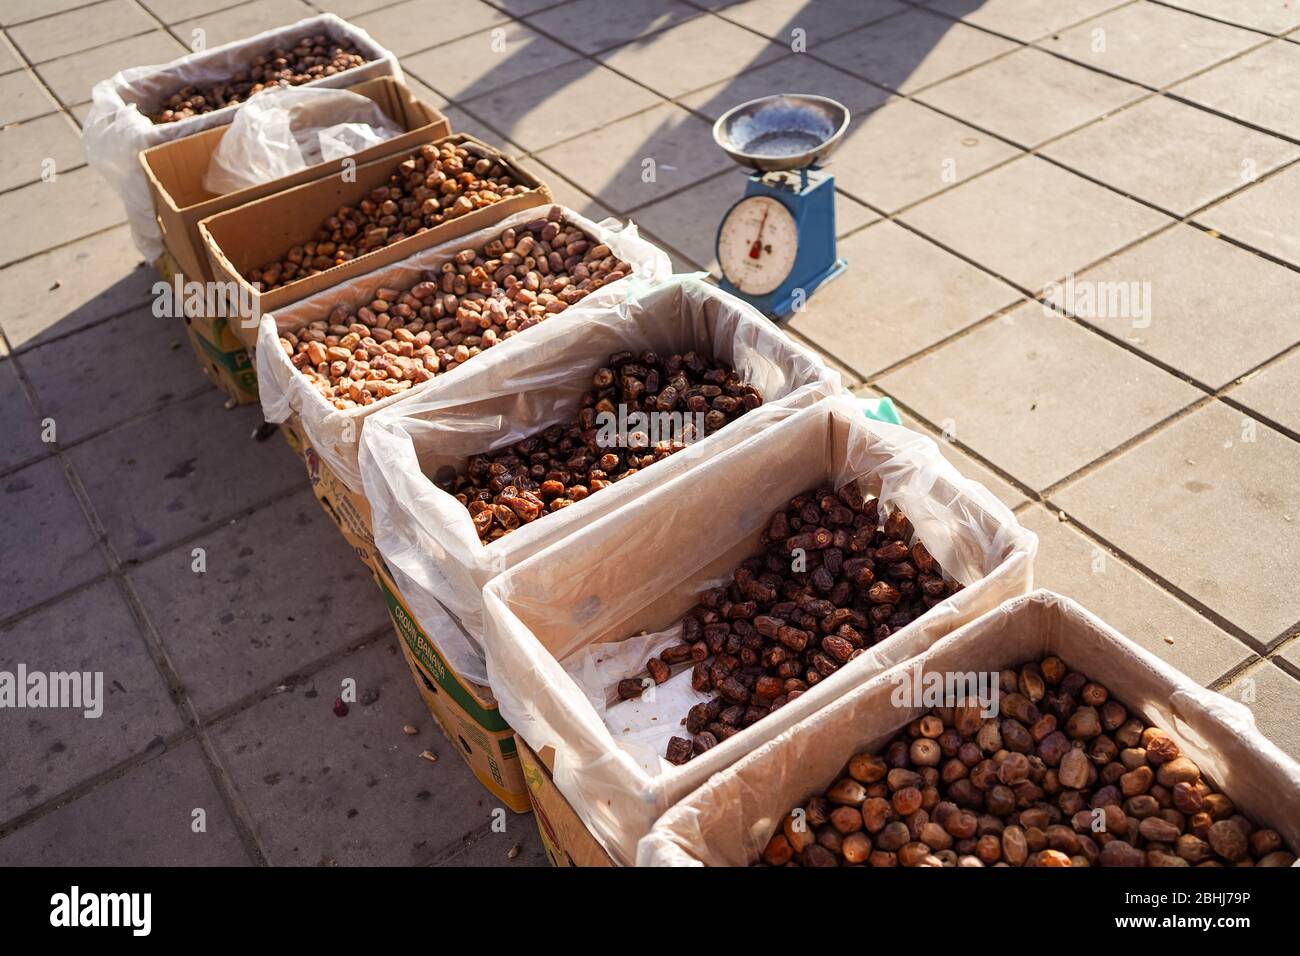 Jeddah / Saudi Arabia - January 16, 2020: street stall selling dates with scales in the background Stock Photo